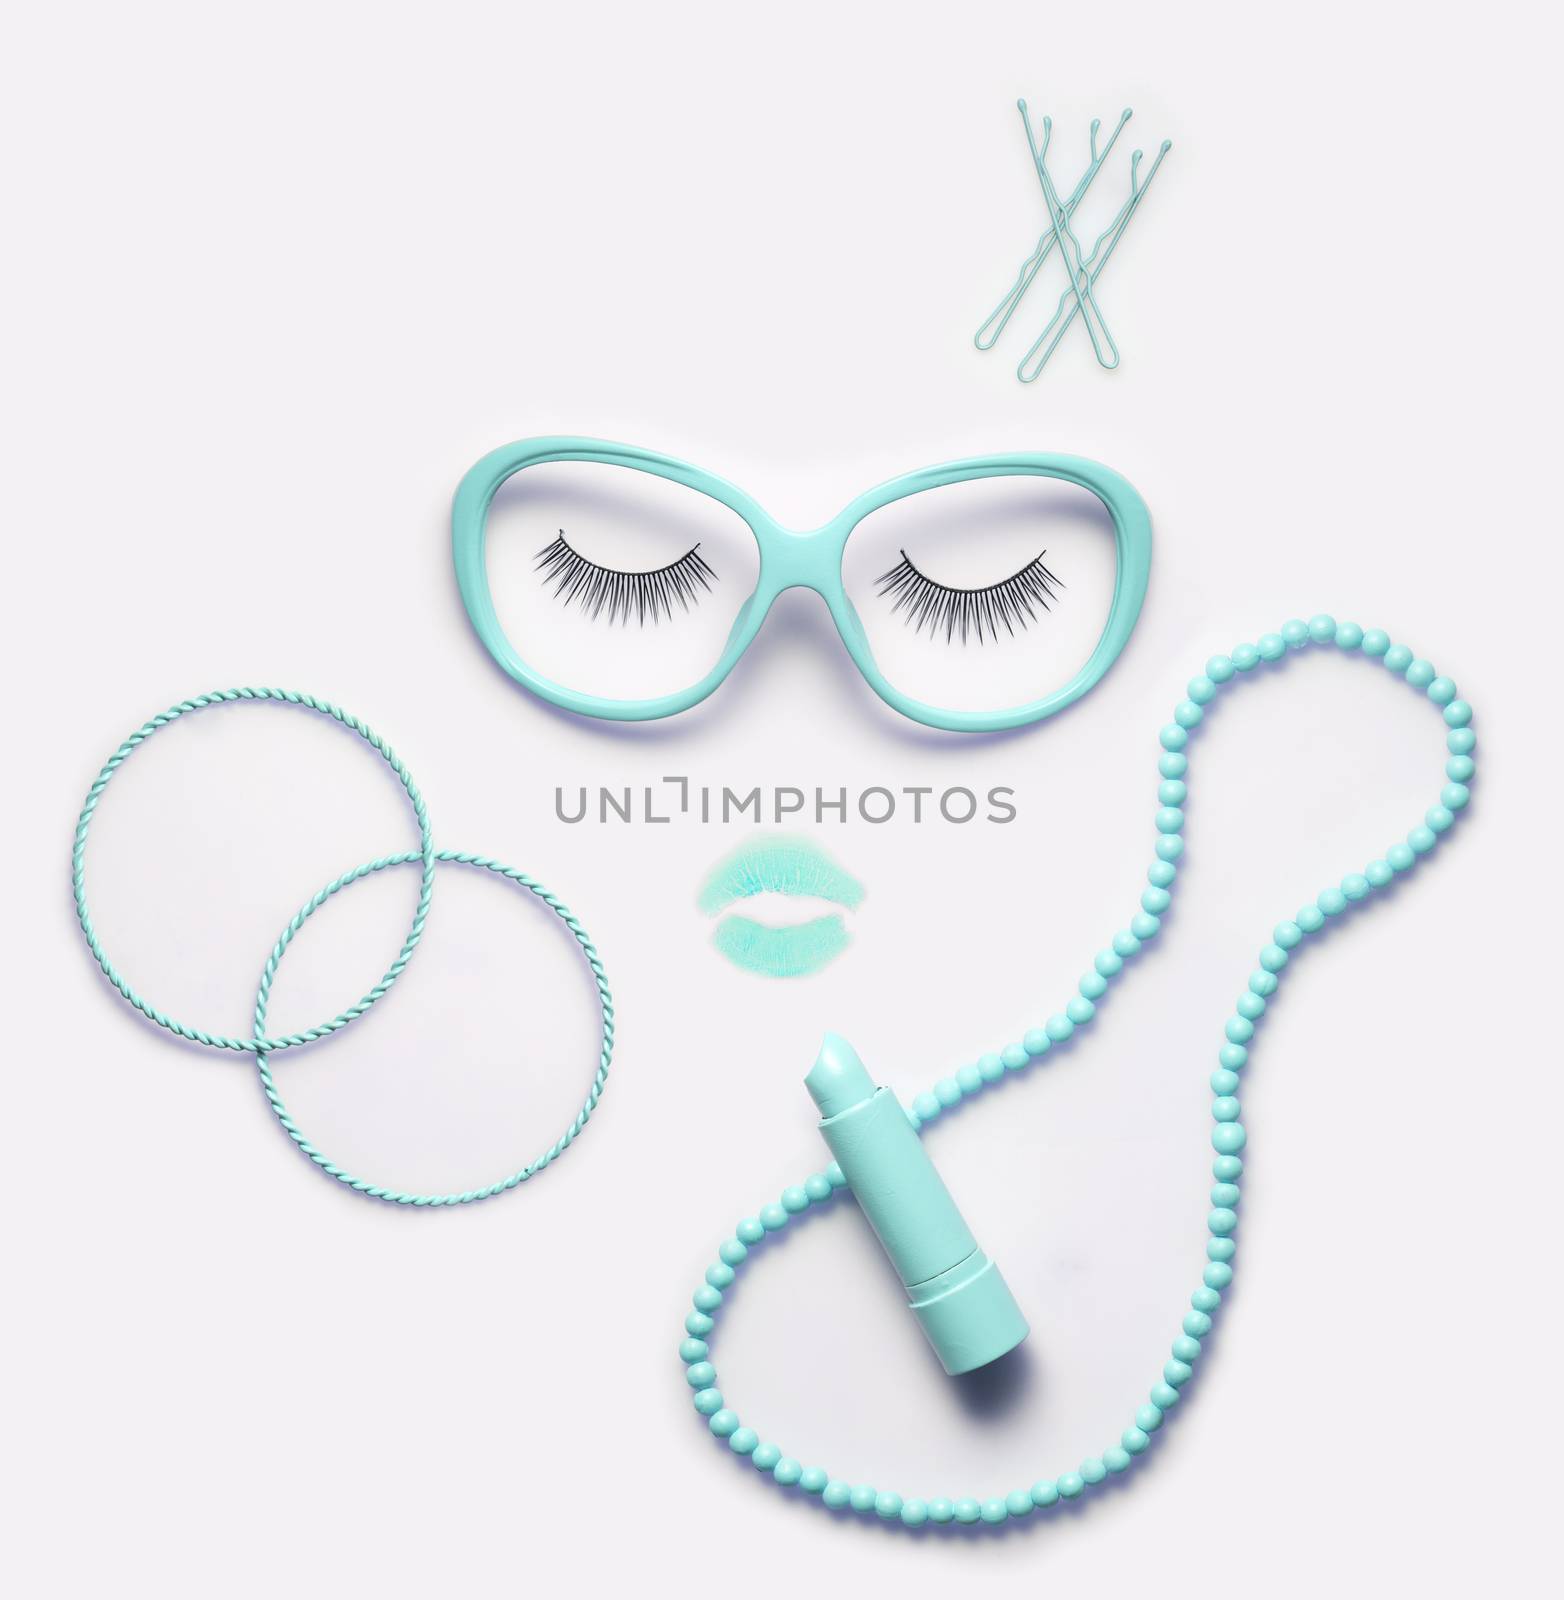 Creative concept photo of accessory and makeup set as a portrait of a woman on white background.